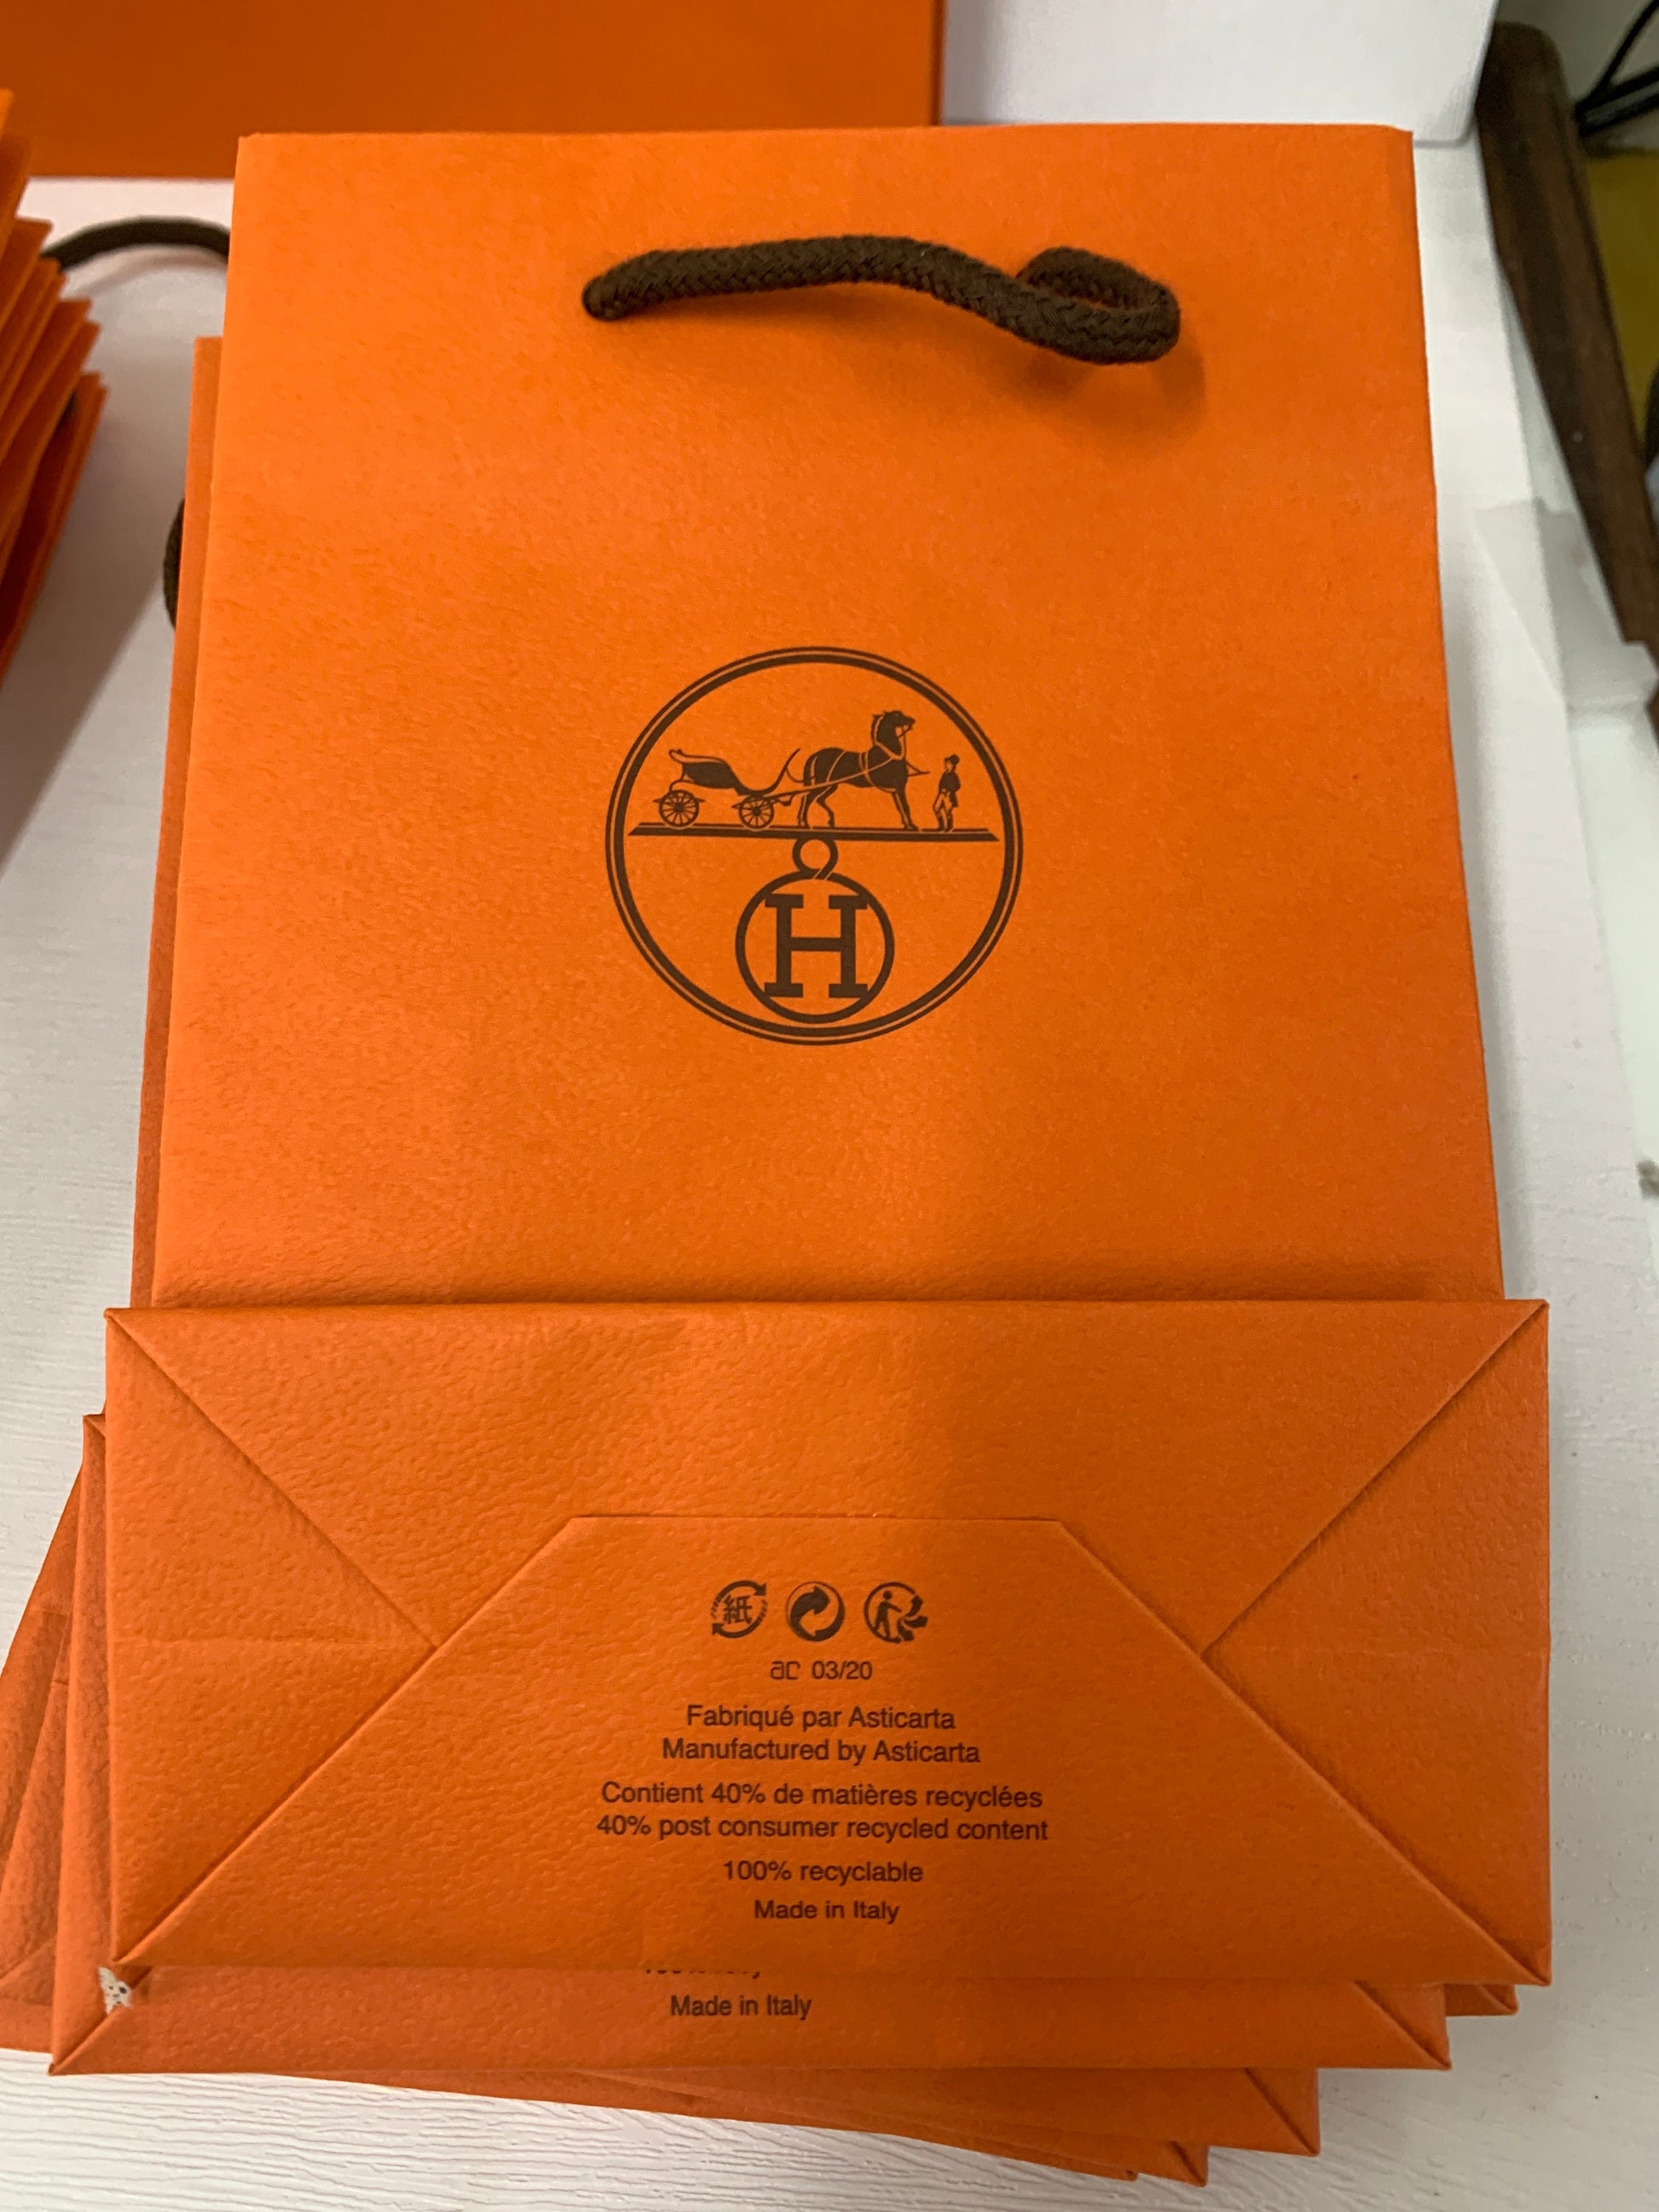 Authentic HERMES Small Orange Shopping/Gift Bag, 8.5 x 6 inch